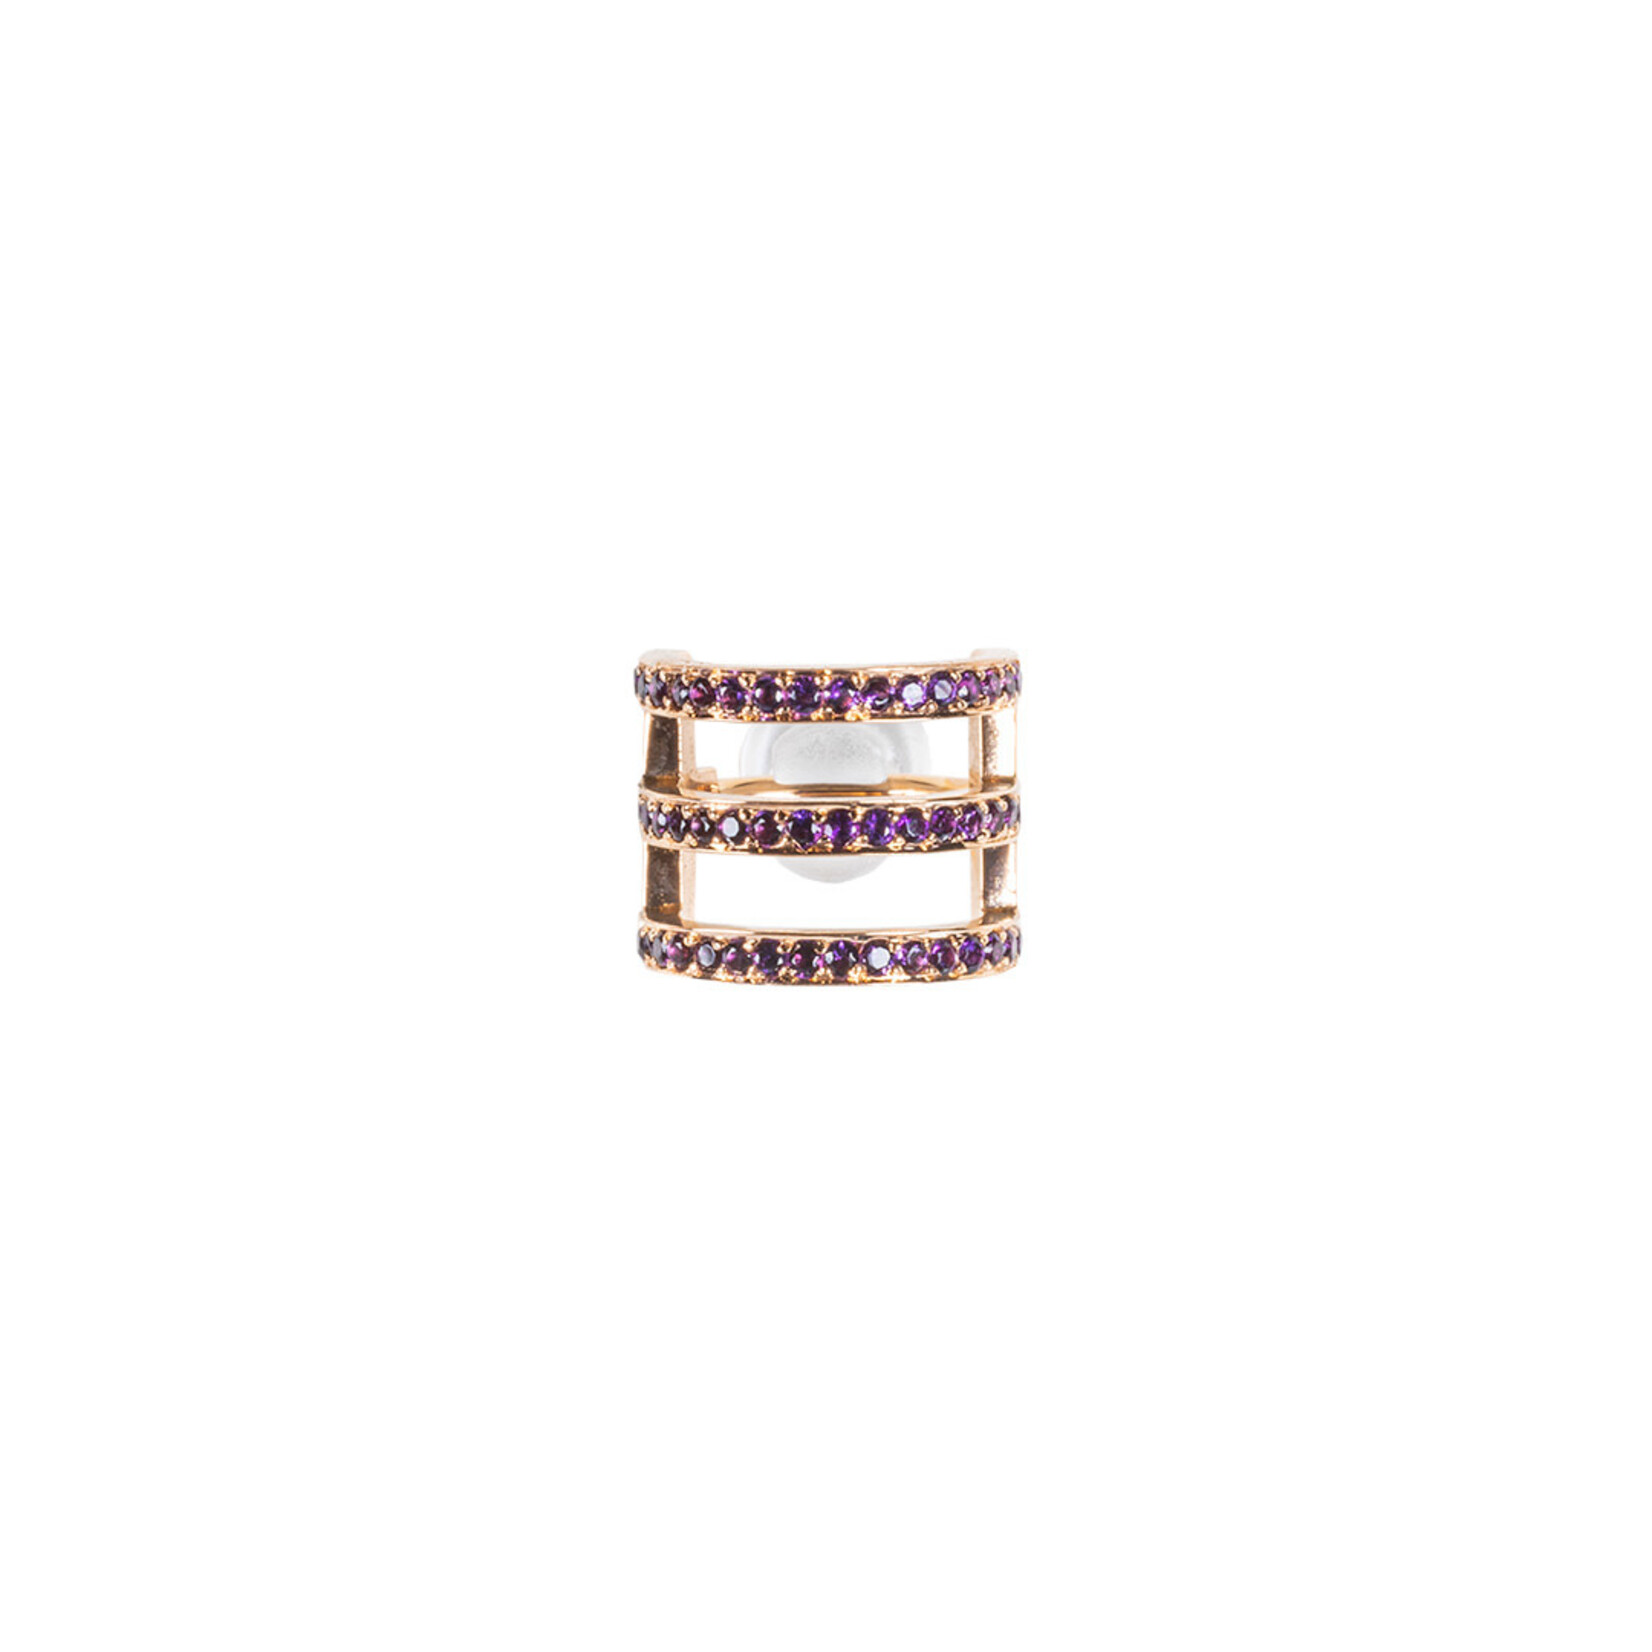 BVLA BVLA 16g 11/32 rose gold "Tokyo" clicker with 70x 1.0 amethyst